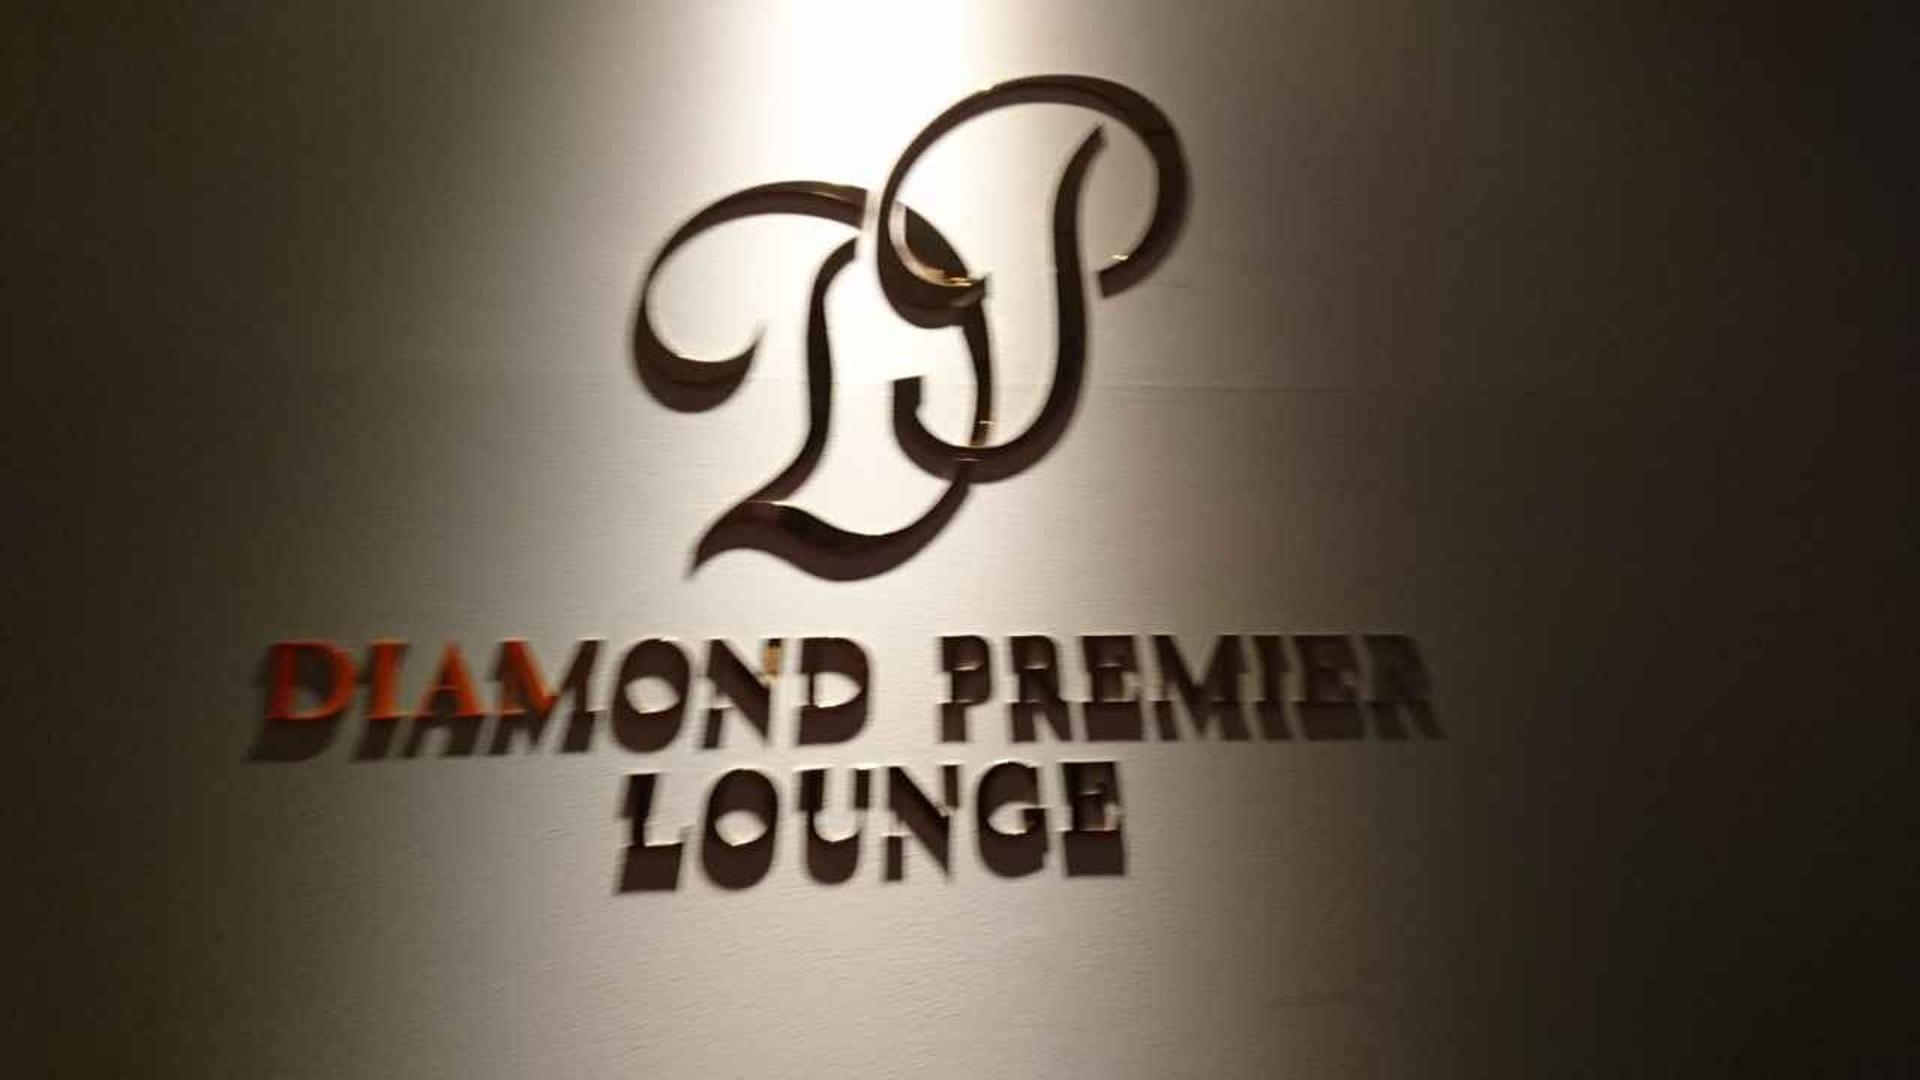 Japan Airlines JAL Diamond Premier Lounge (South Wing) image 2 of 2